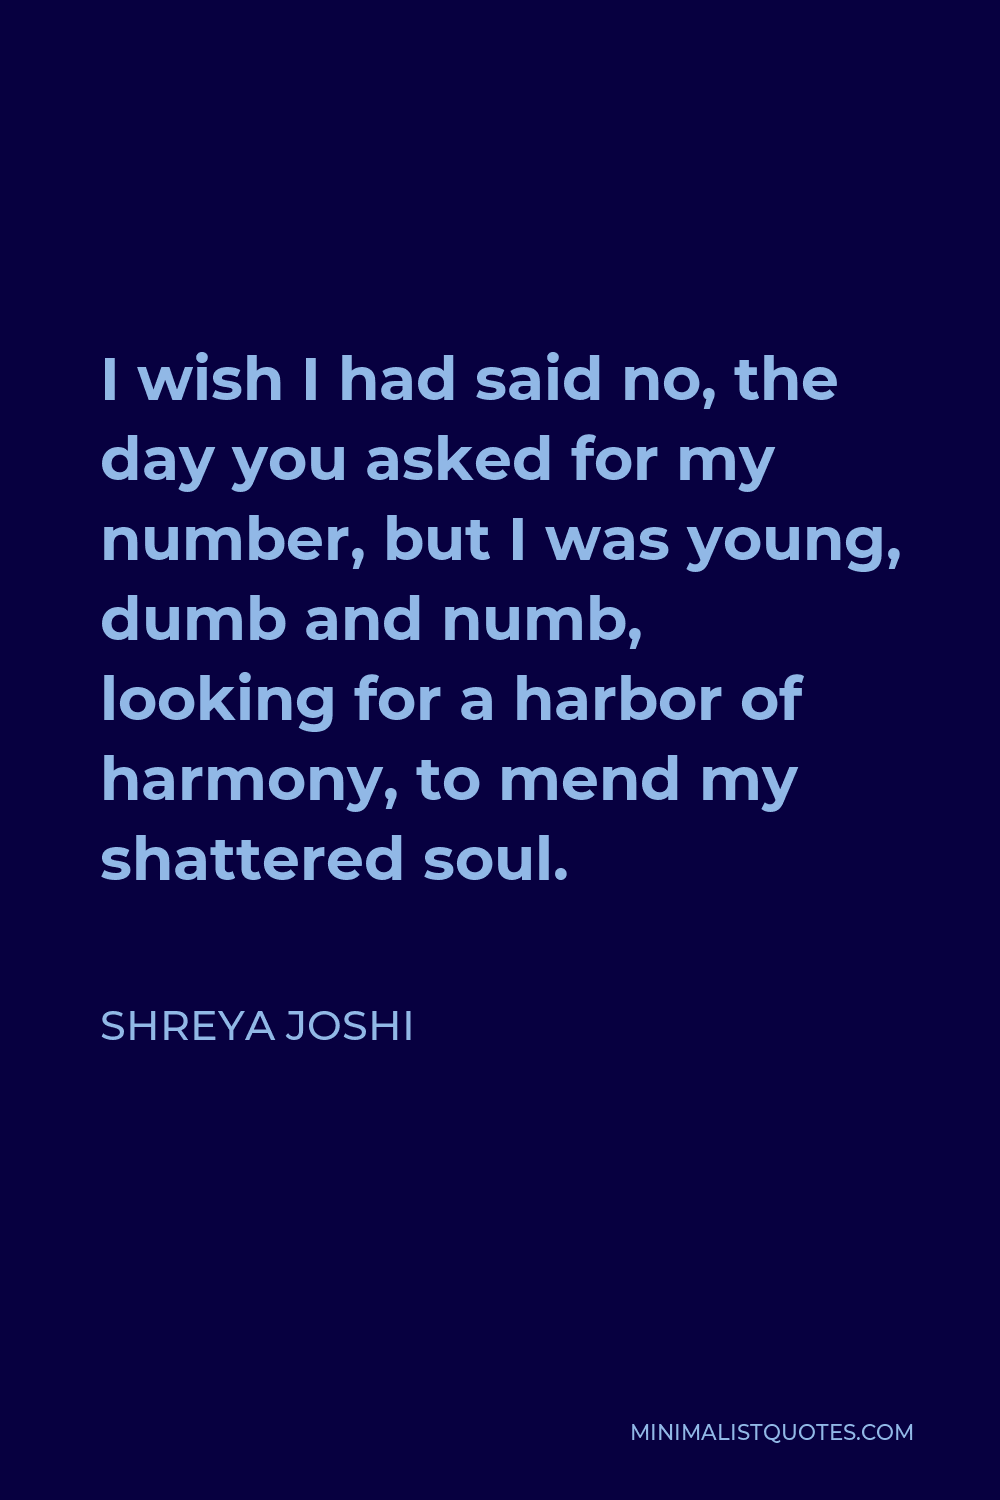 Shreya Joshi Quote - I wish I had said no, the day you asked for my number, but I was young, dumb and numb, looking for a harbor of harmony, to mend my shattered soul.